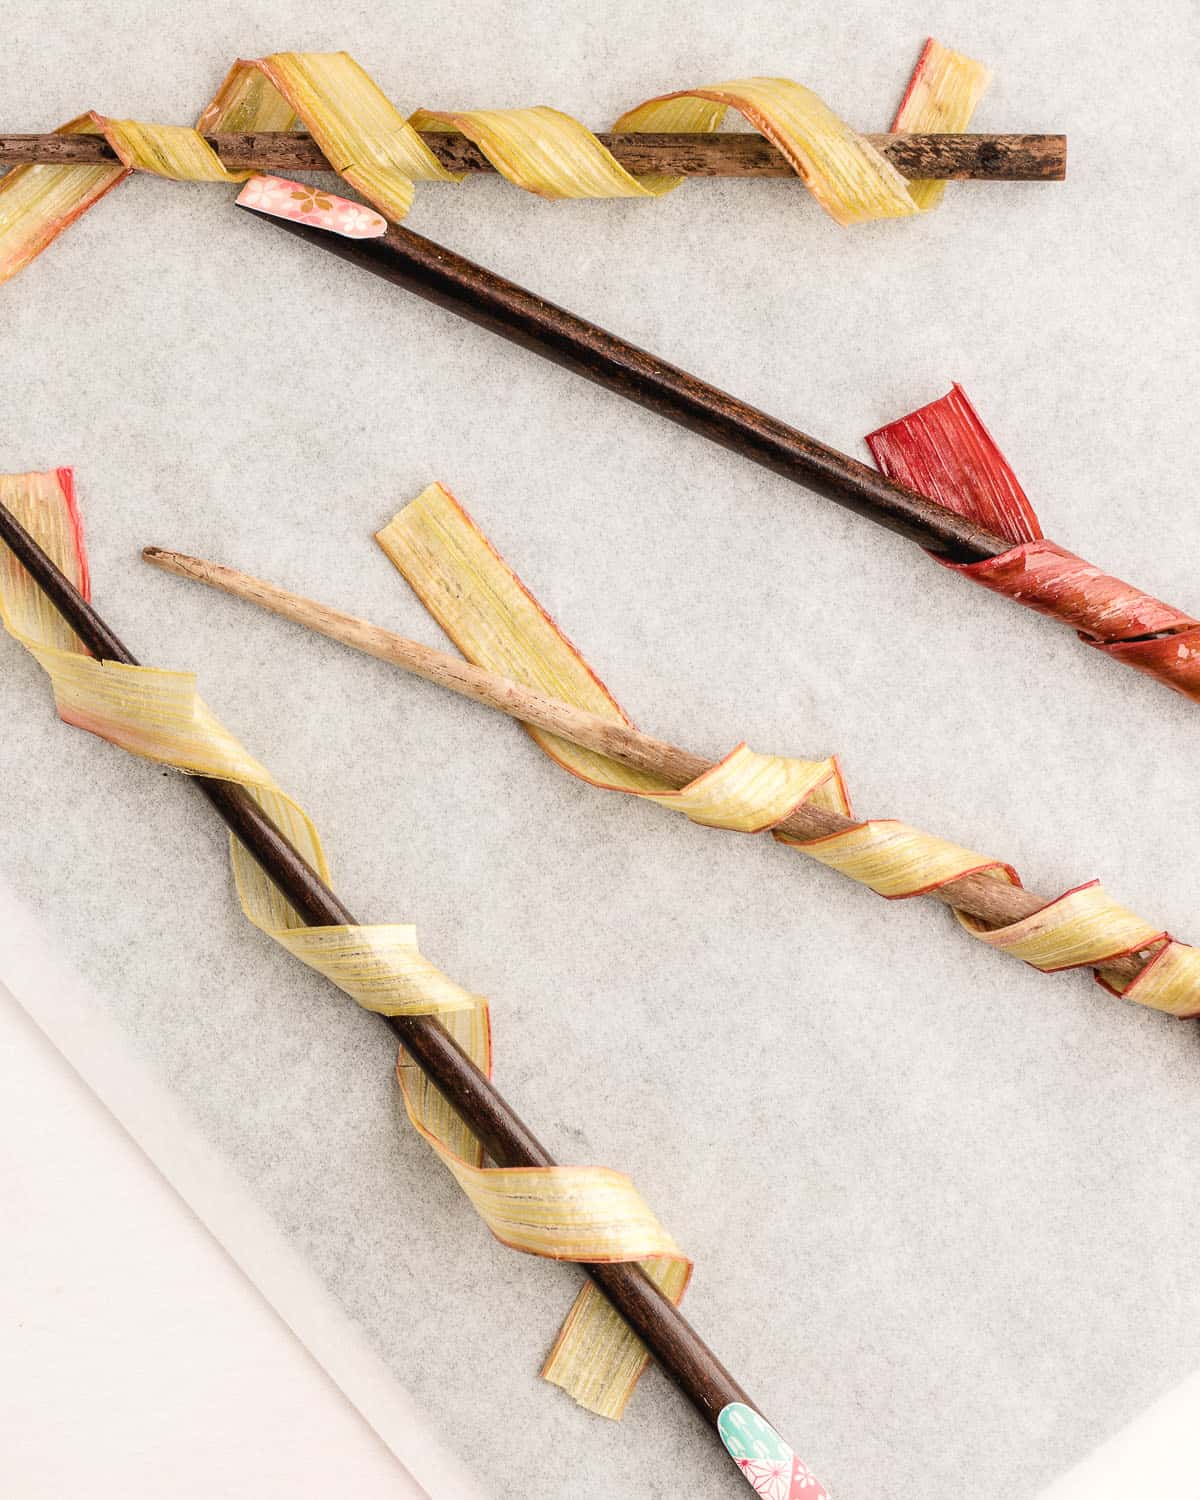 Rhubarb strips wrapped around wooden chopsticks on a parchment lined baking sheet.